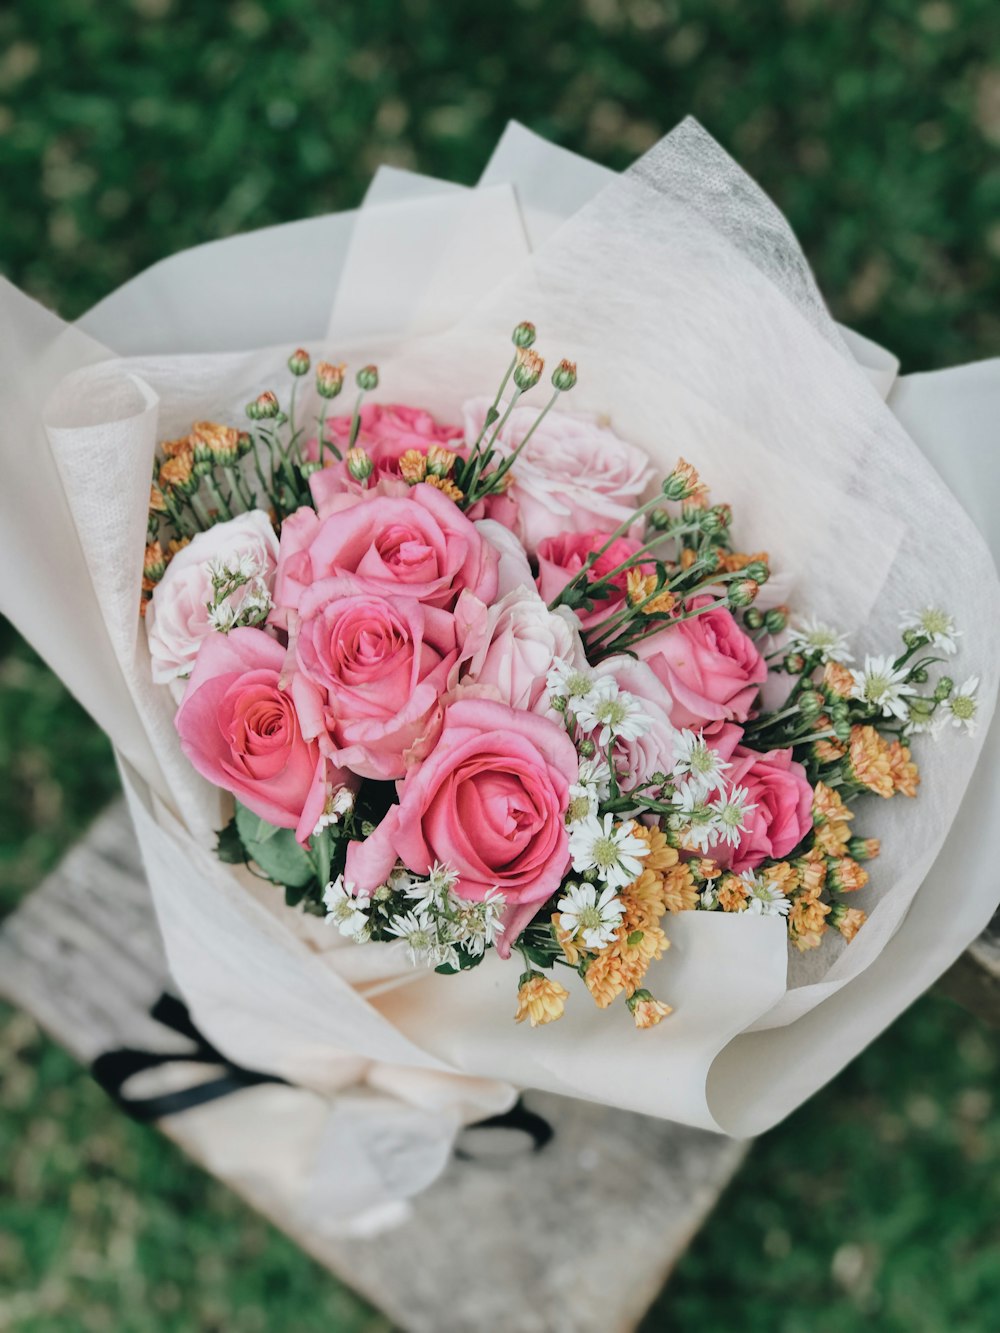 500+ Bouquet Pictures HD | Download Free Images on Unsplash